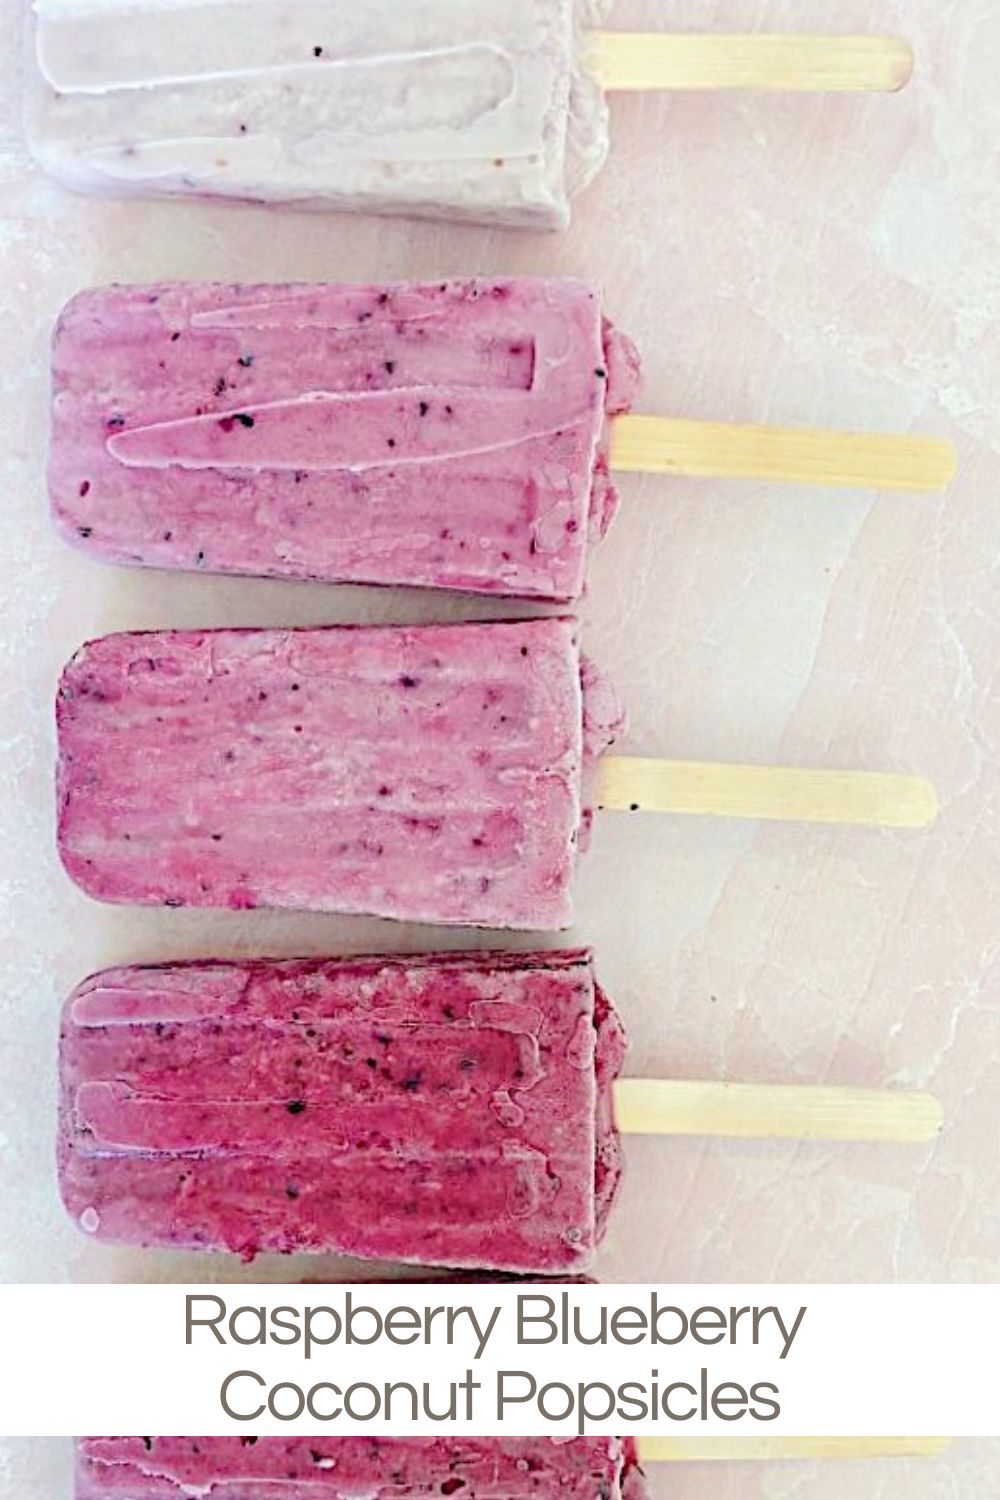 The weather is still hot so I made these Raspberry Blueberry Coconut Popsicles. They are healthy and the best popsicles!